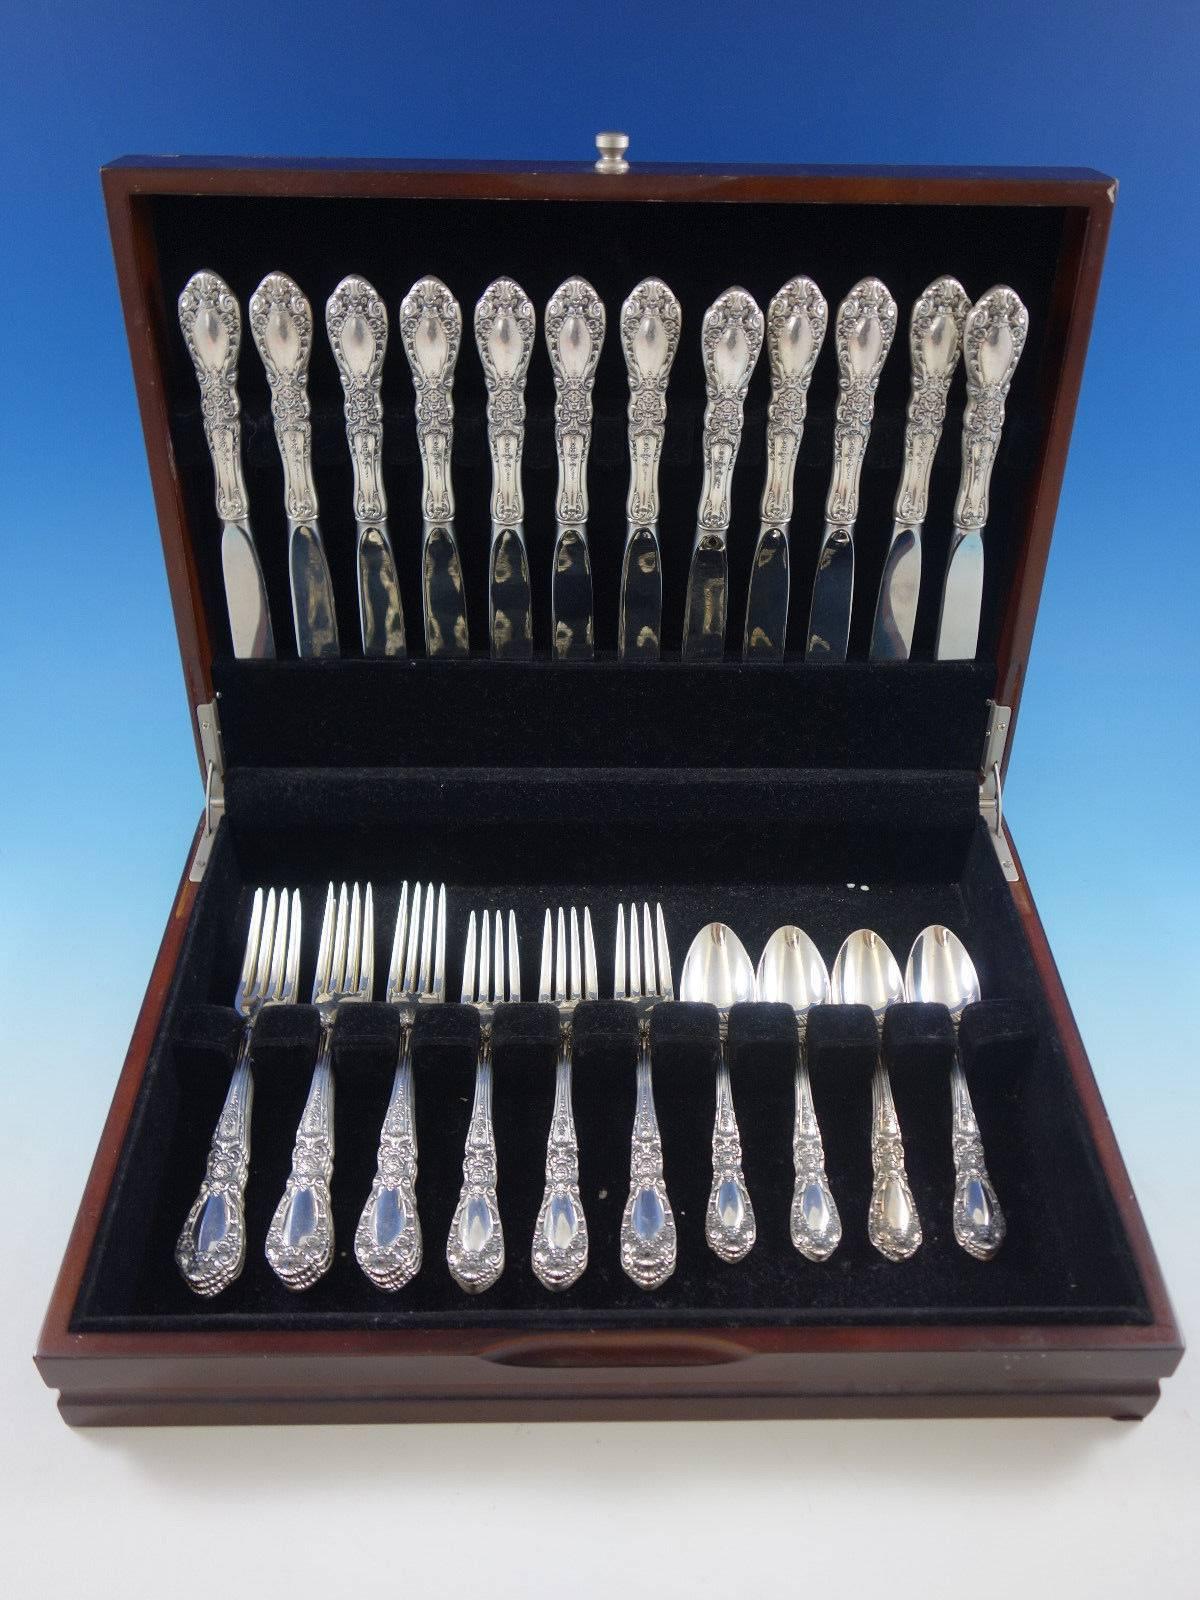 Prince Eugene by Alvin sterling silver flatware set, 48 pieces. This set includes: 

12 knives, 8 7/8